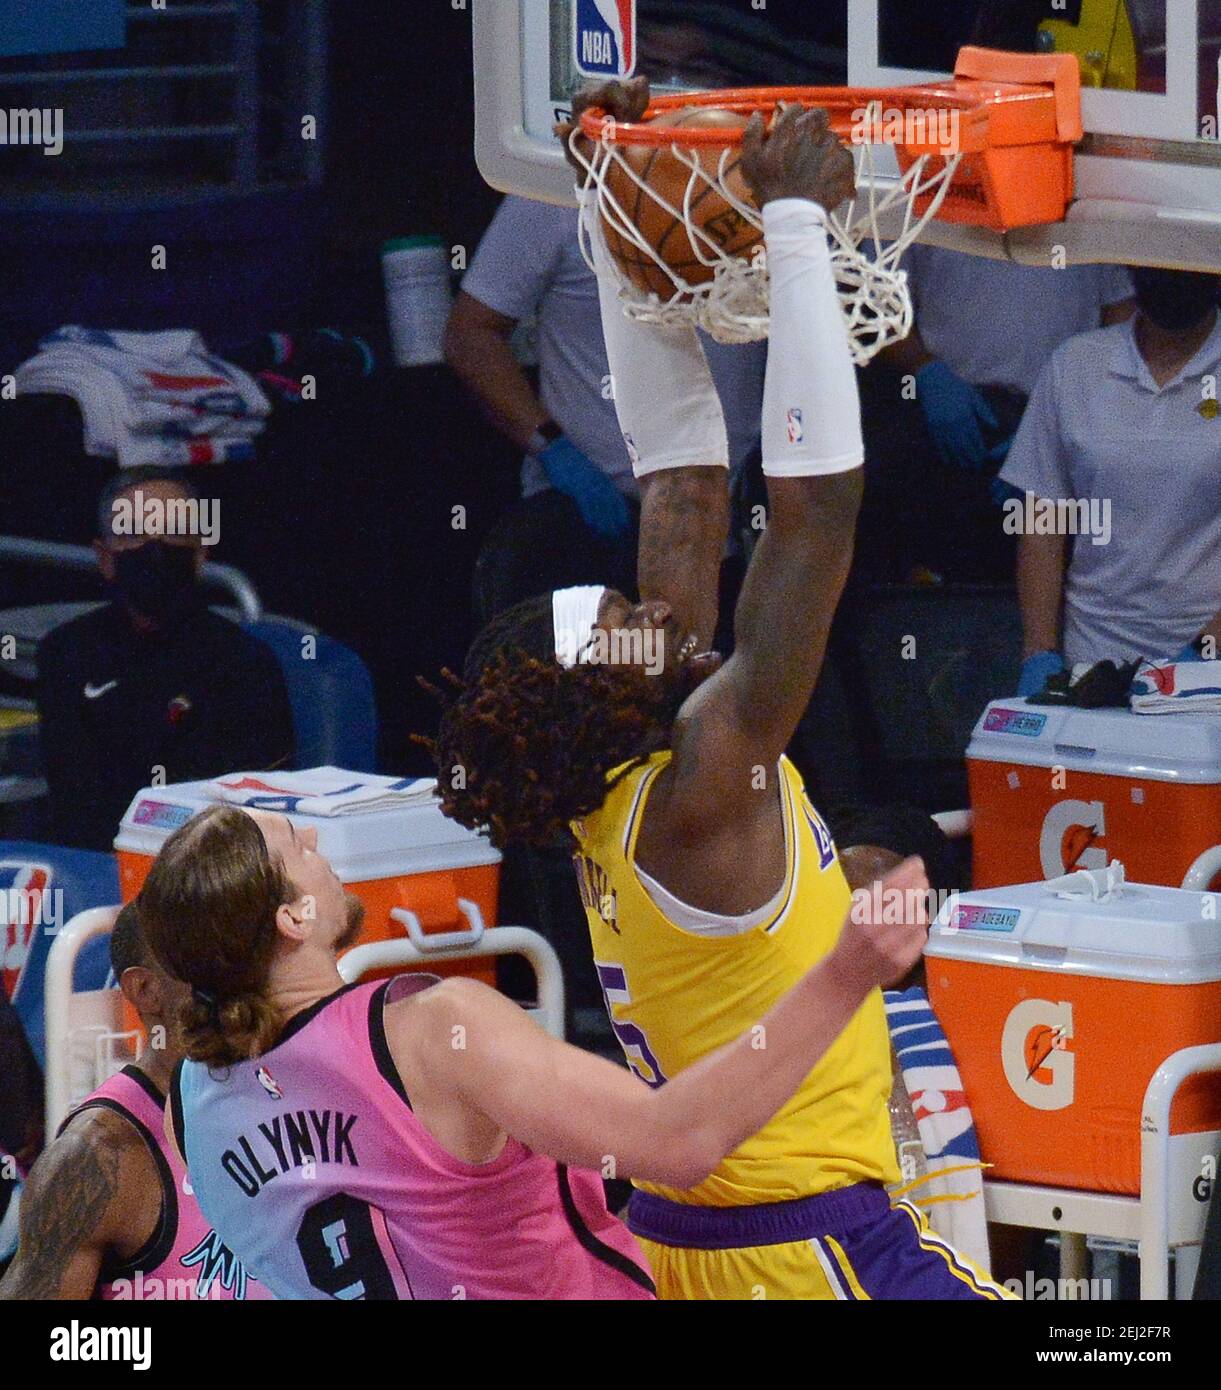 Los Angeles, United States. 20th Feb, 2021. Los Angeles Lakers' center Montreal Harrell scores on Miami Heat center Kelly Olynyk during the second half at Staples Center in Los Angeles on Saturday, February 20, 2021. The Heat defeated the Lakers 96-94. Photo by Jim Ruymen/UPI Credit: UPI/Alamy Live News Stock Photo